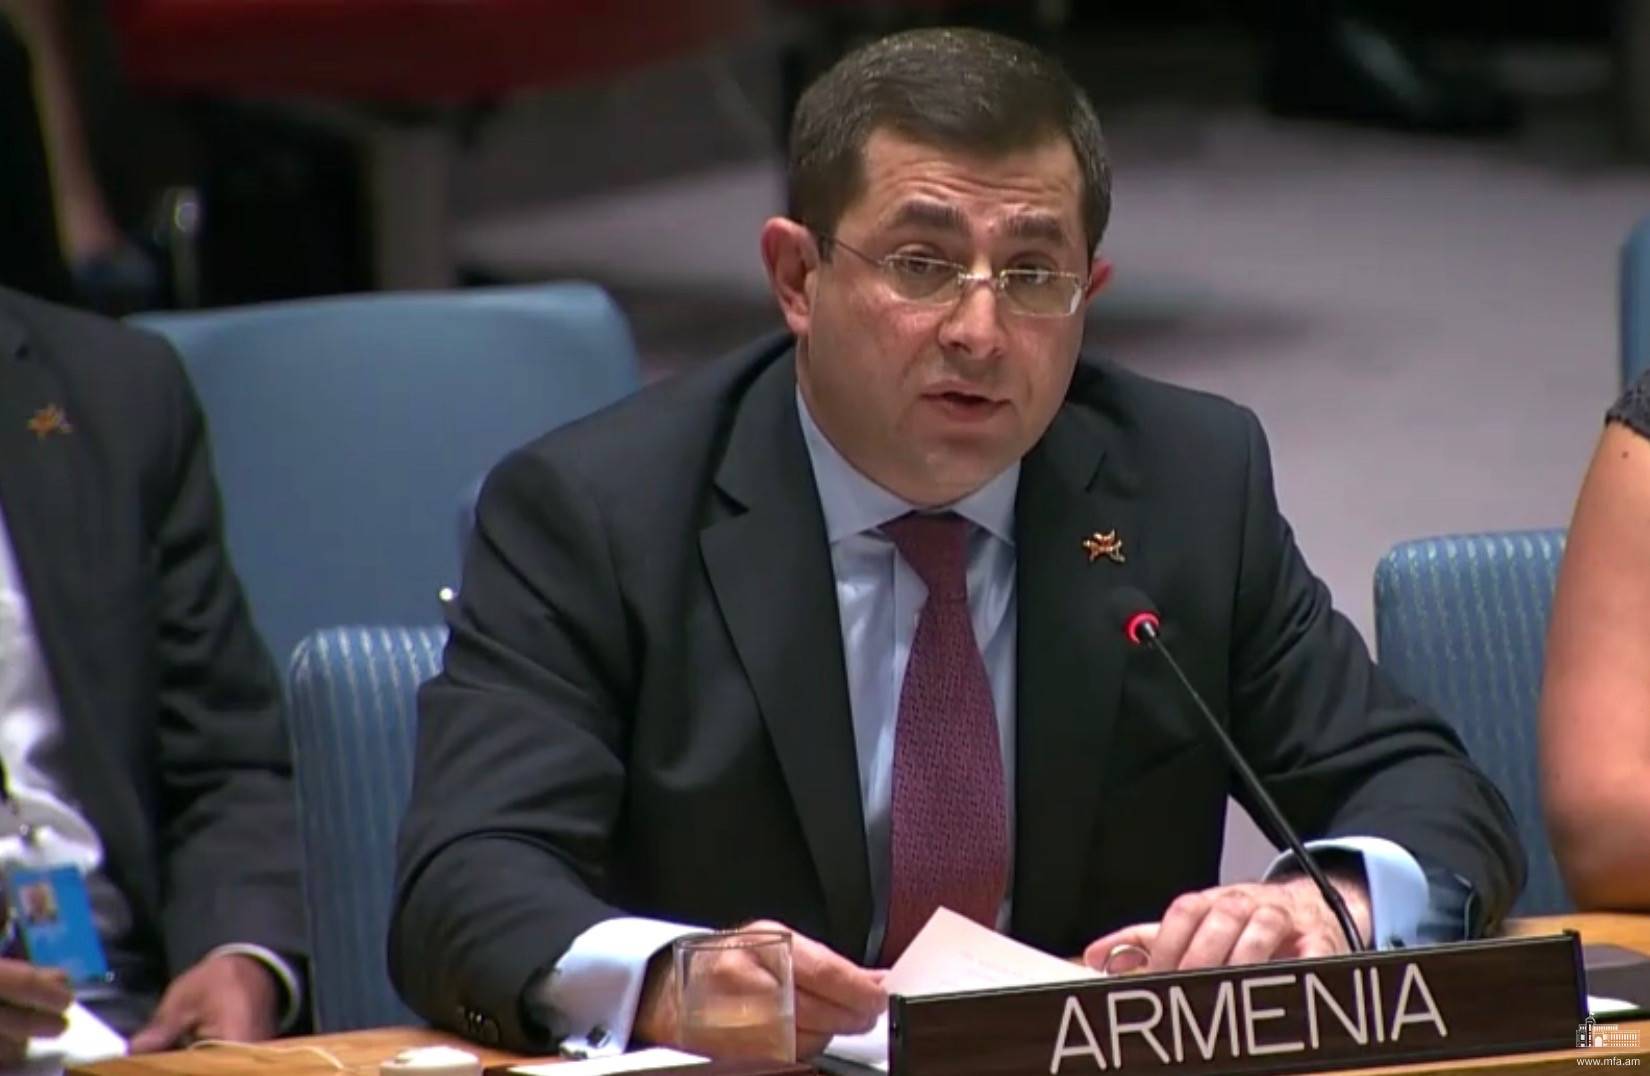 Armenia took part in the UN Security Council Open Debate on “Children and Armed Conflict”